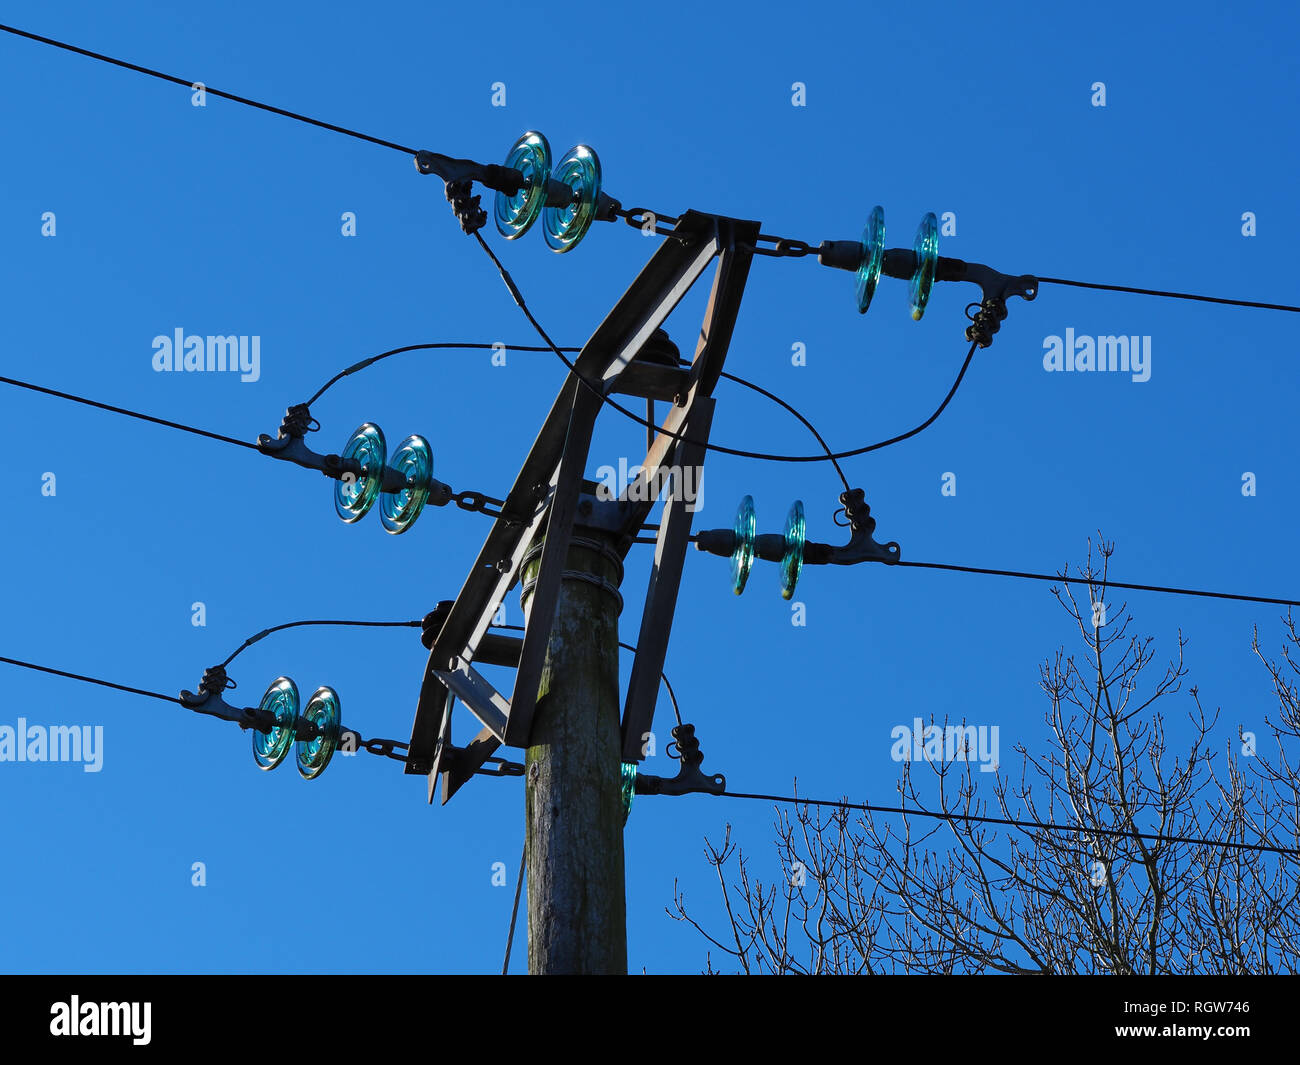 Overhead electric power lines with blue glass insulator disks and a clear blue sky Stock Photo